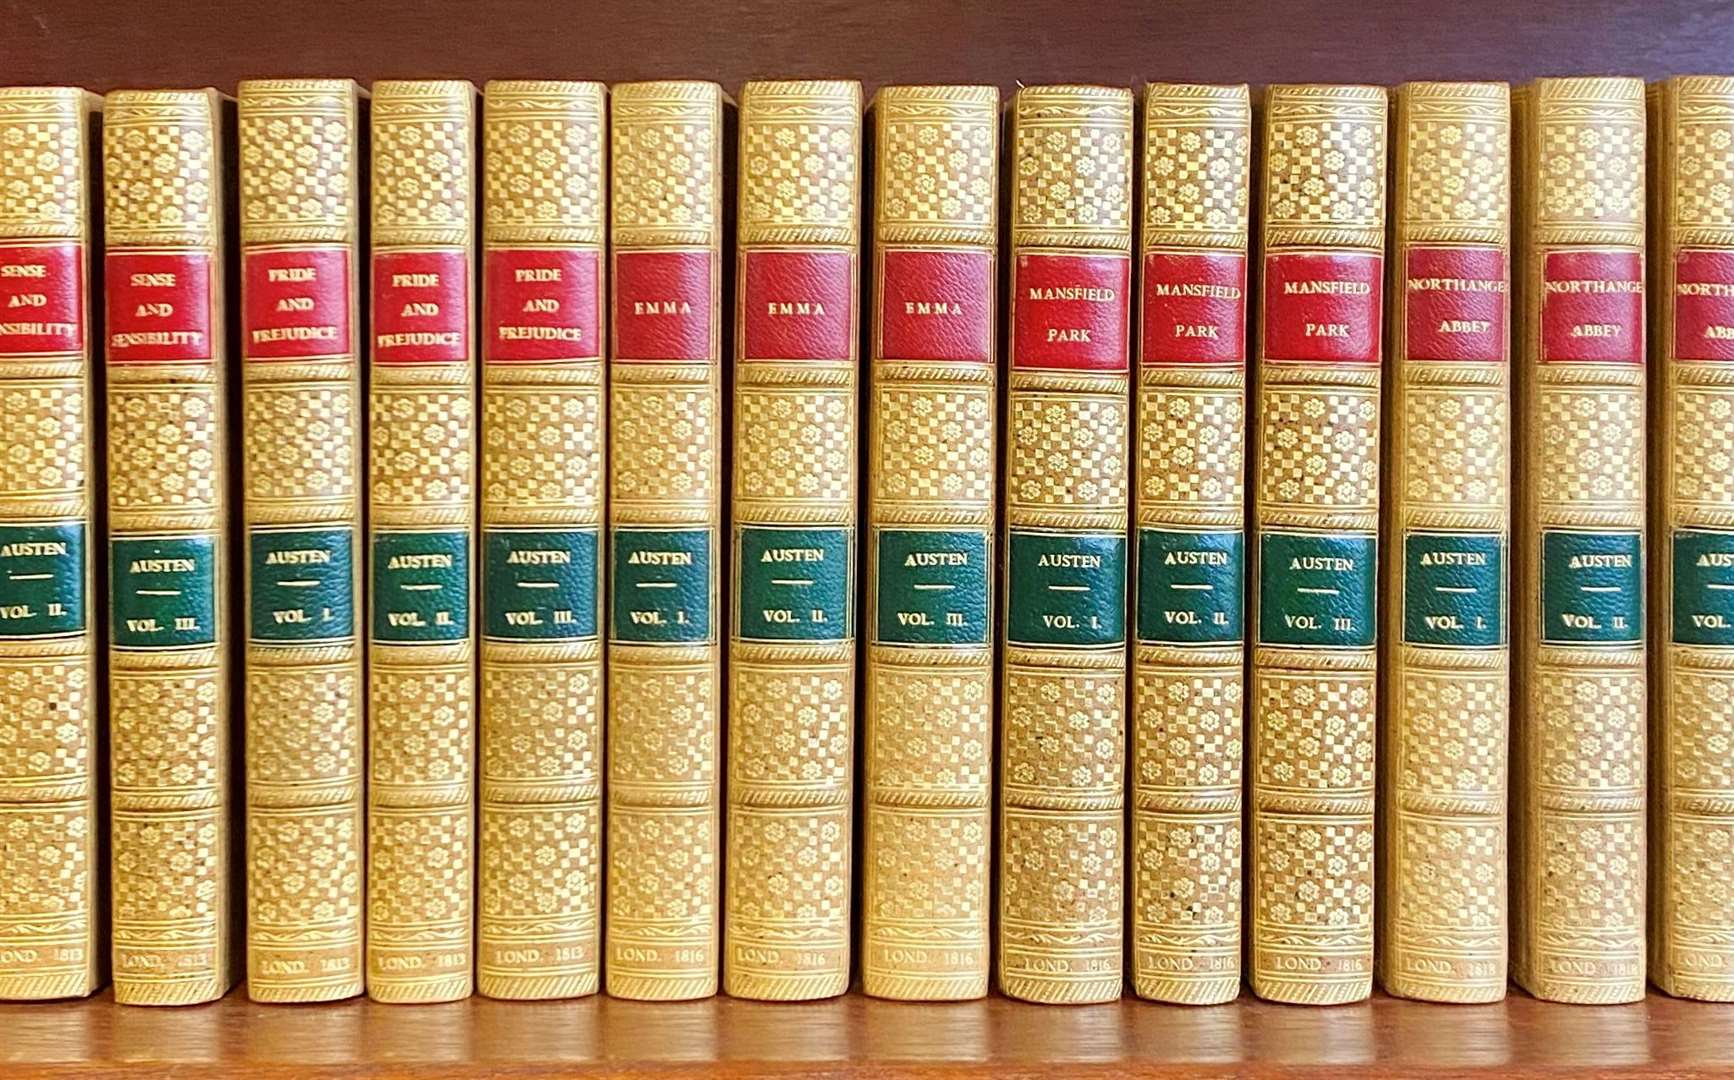 Jane Austen has sold more than 30 million copies of her books